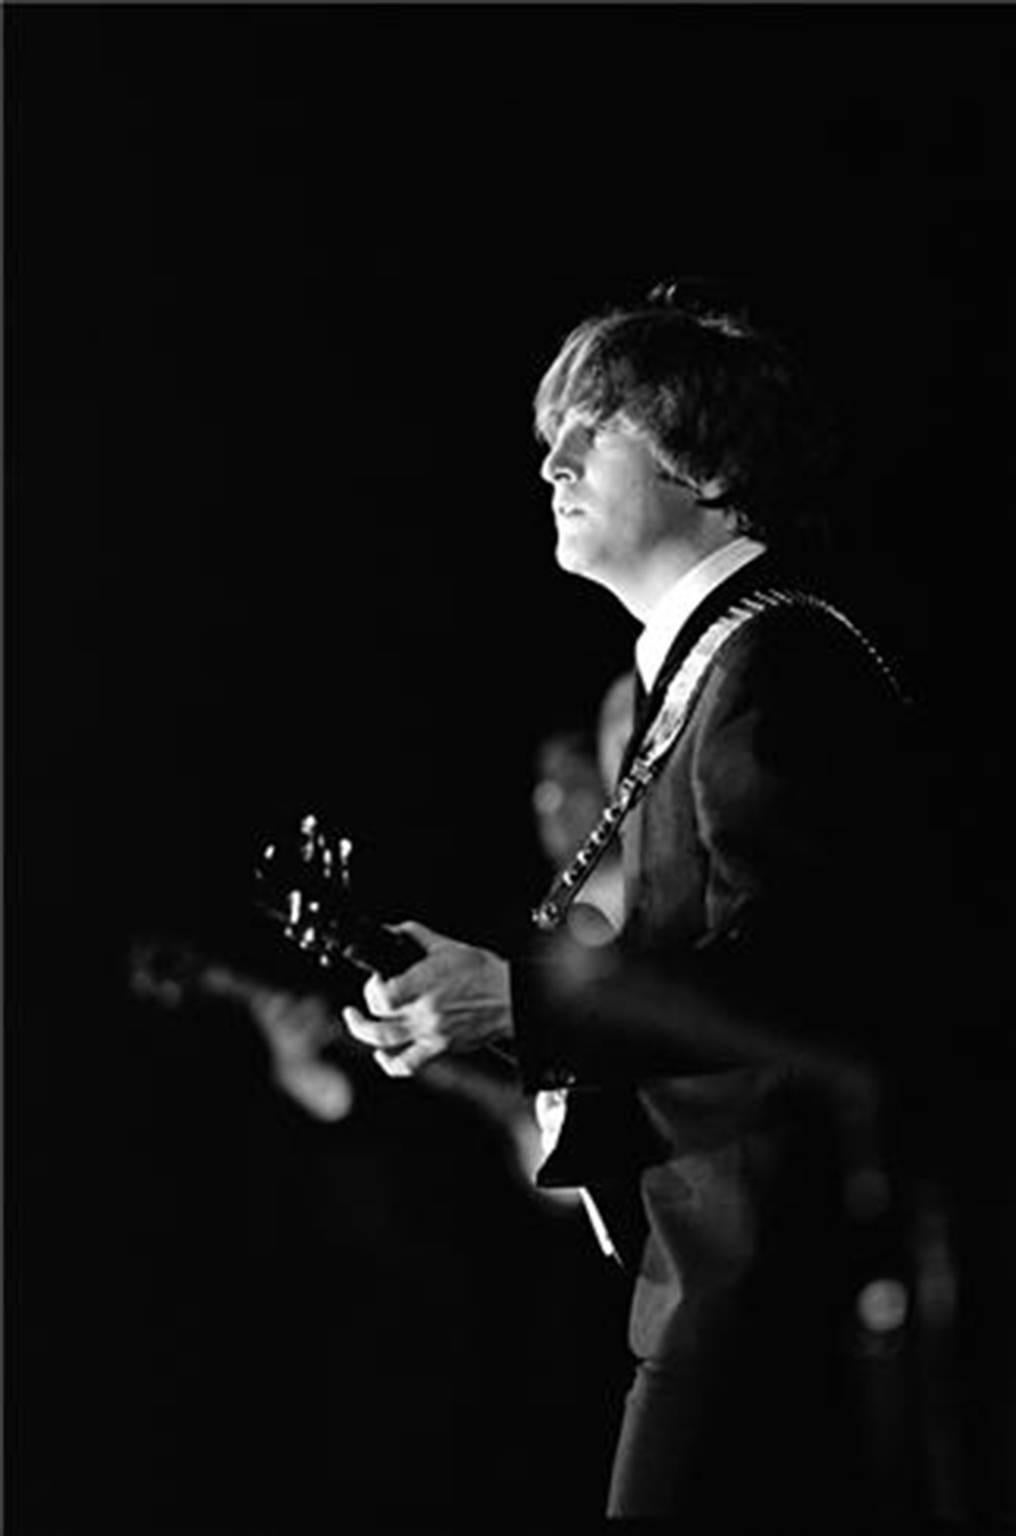 Curt Gunther Black and White Photograph - John Lennon on Stage